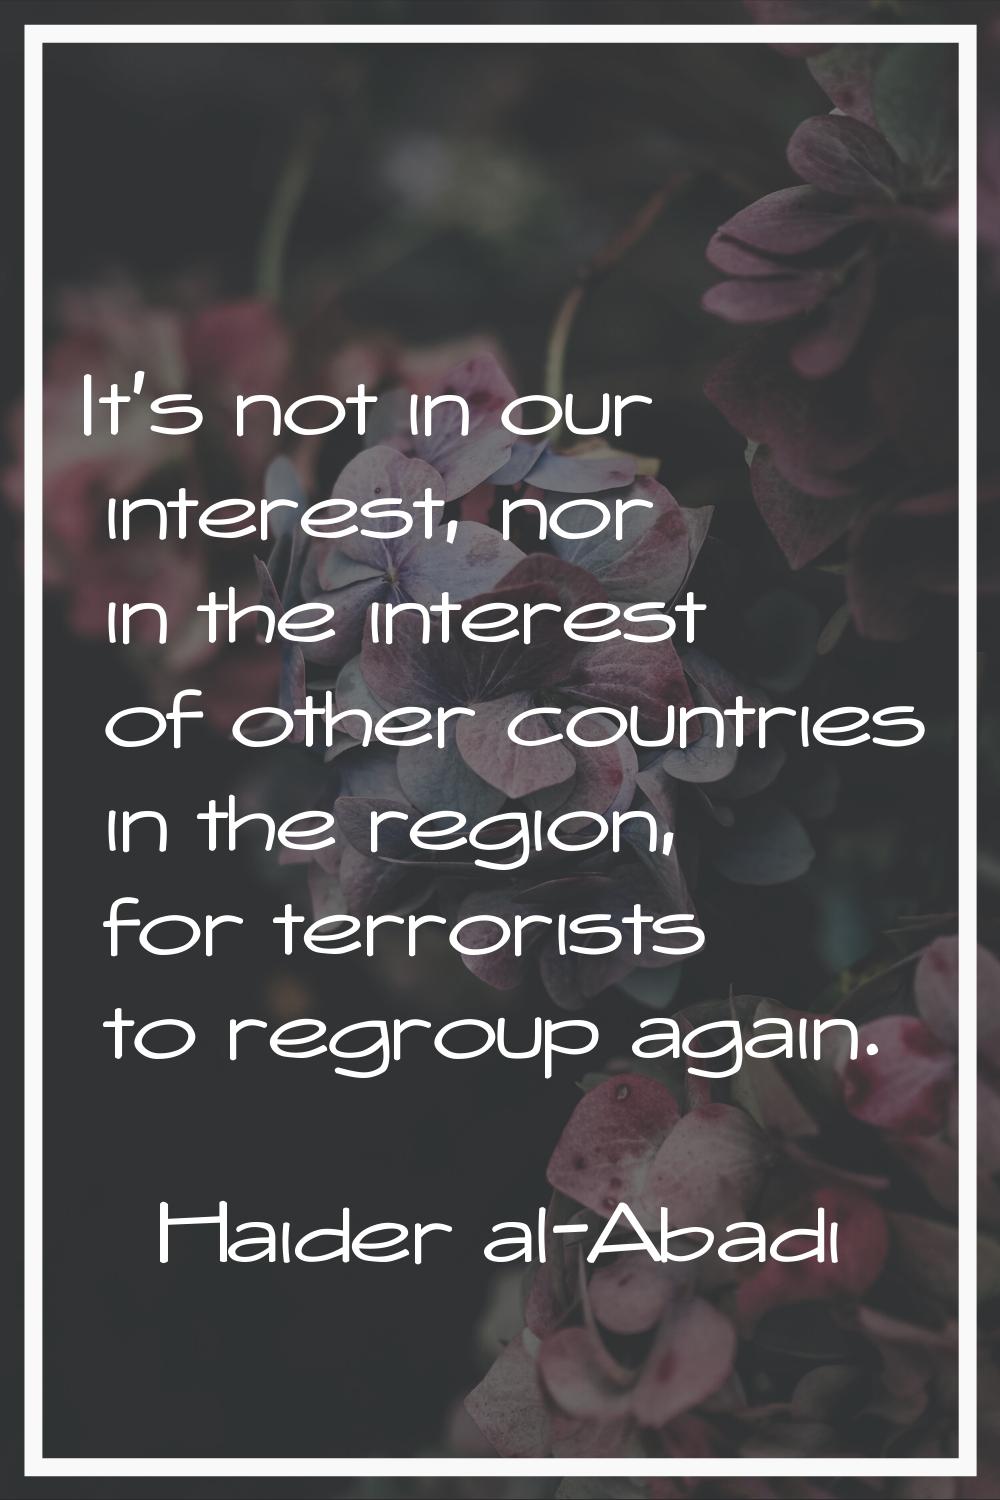 It's not in our interest, nor in the interest of other countries in the region, for terrorists to r